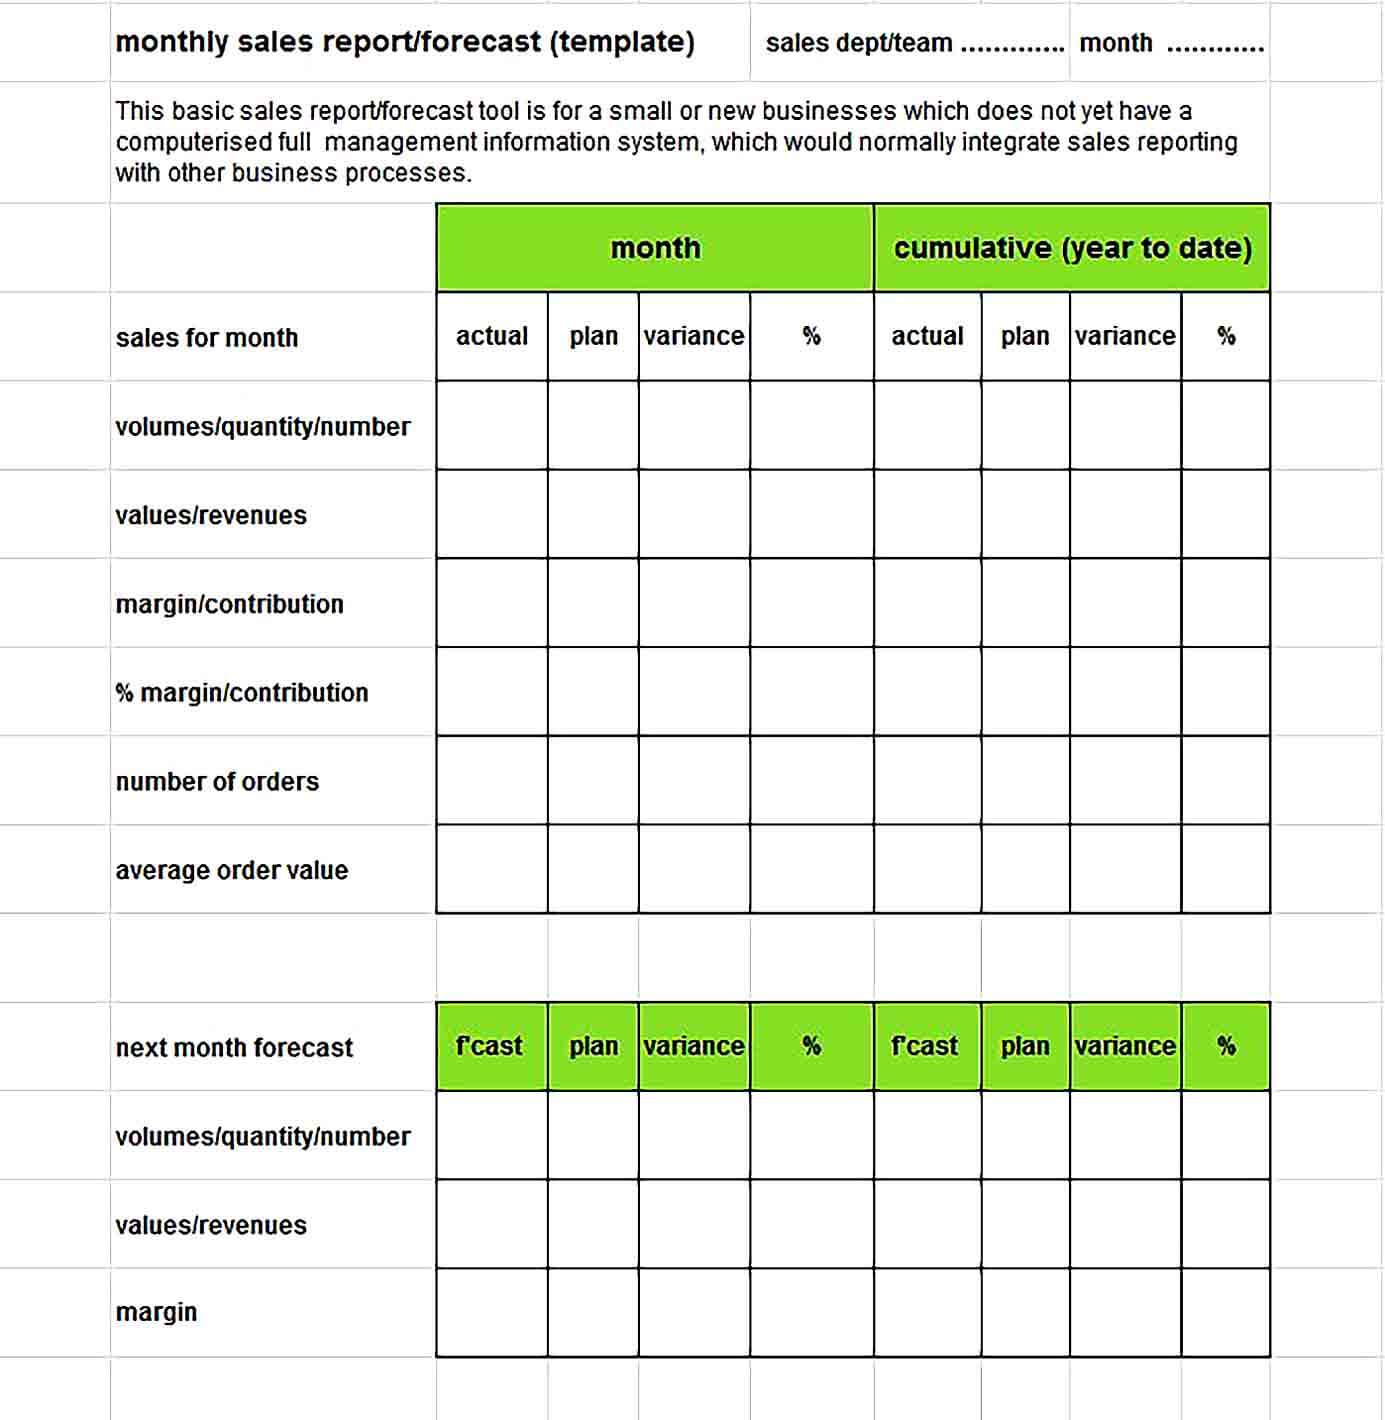 Sample Monthly Sales Report Forecast Template2